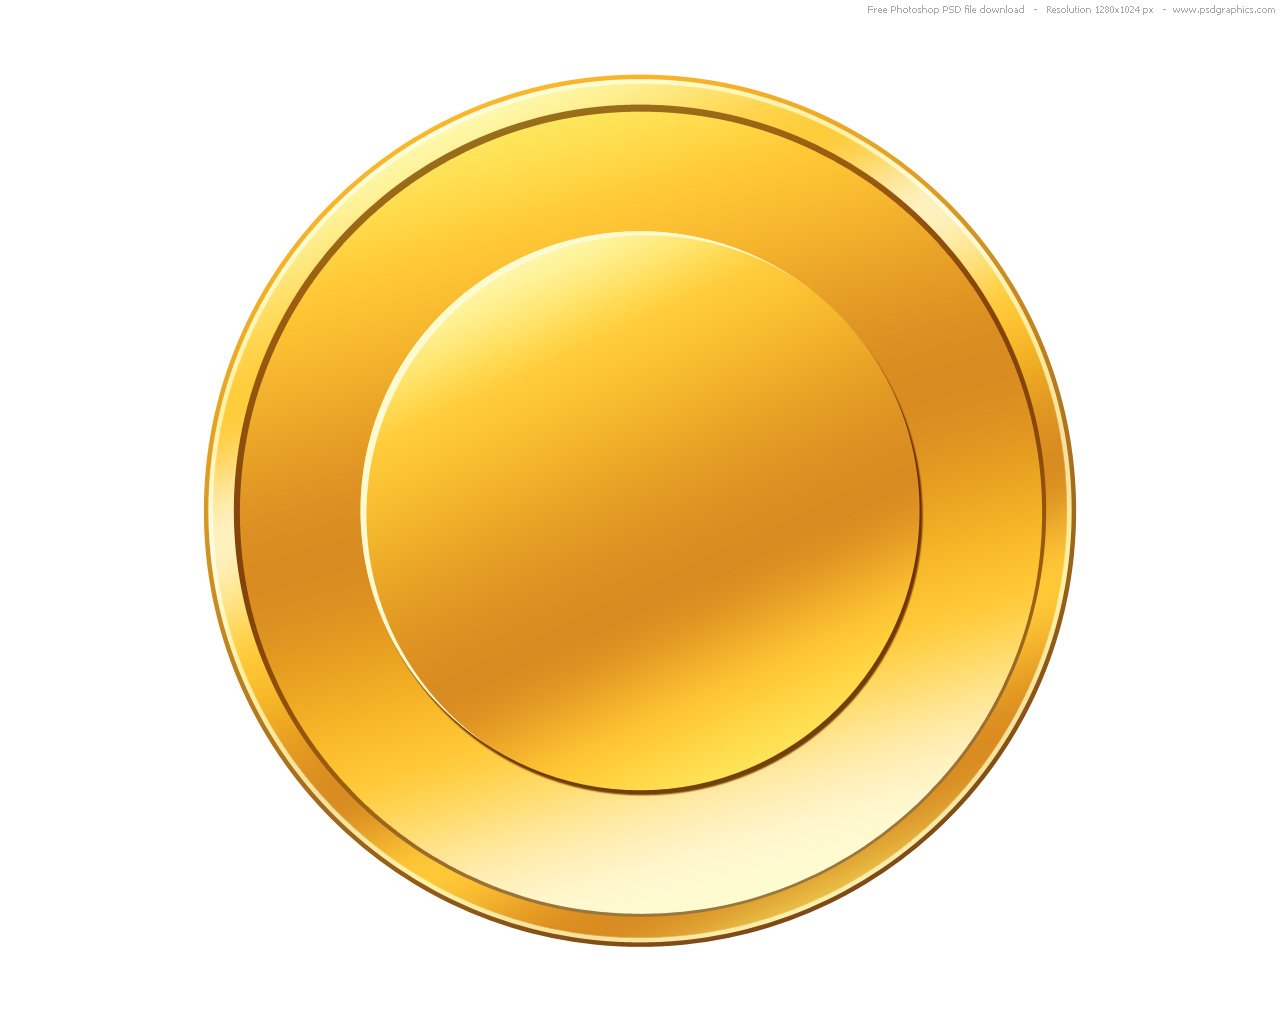 PSD gold coin icon | PSDGraphics